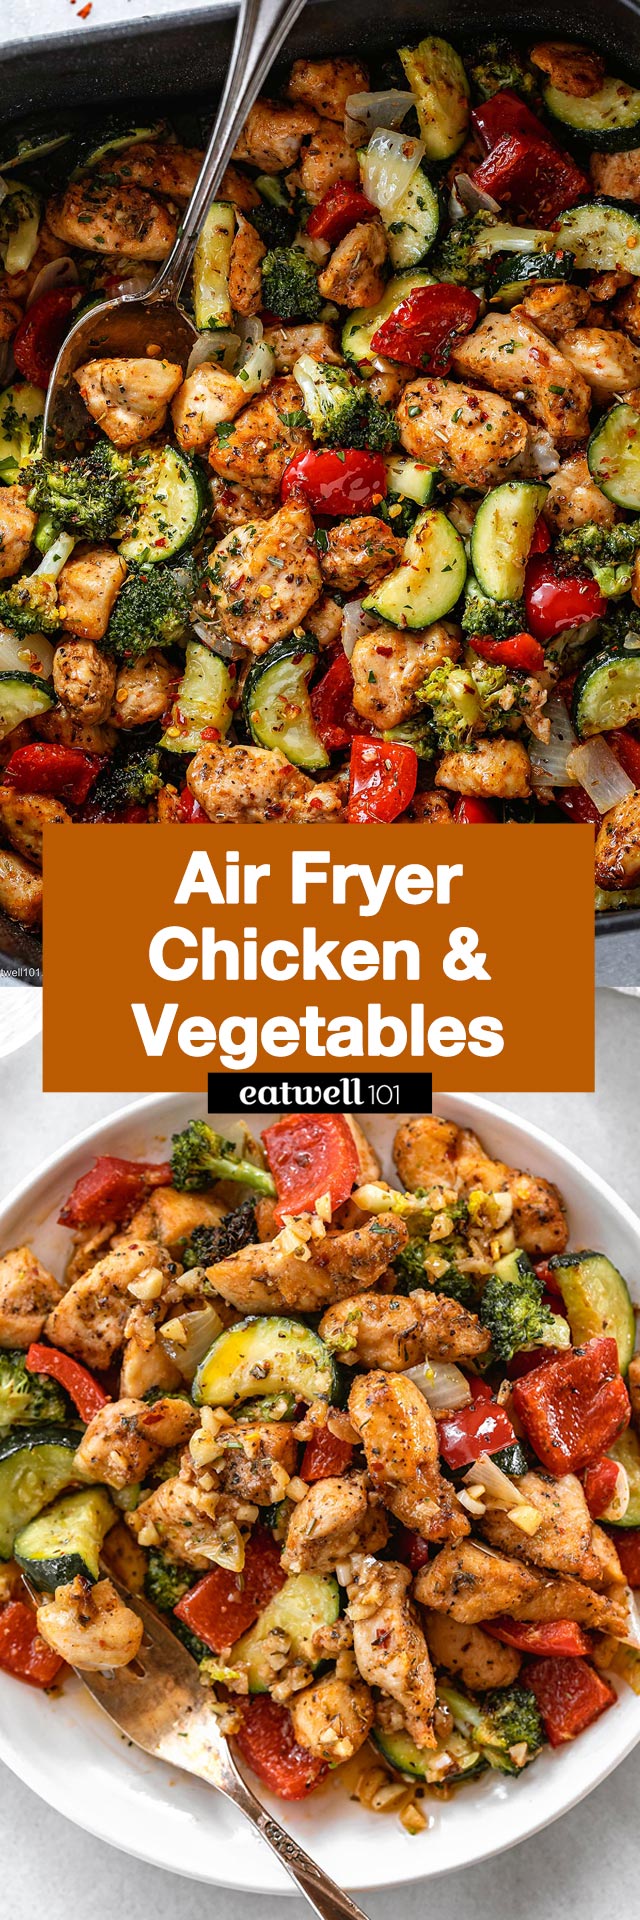 This air fryer chicken and veggies recipe - #airfryer #chicken #recipe #eatwell101 - Super easy to make and full of flavor. Air fryer chicken and vegetables make a complete and healthy low-carb or keto meal in under 20 minutes!